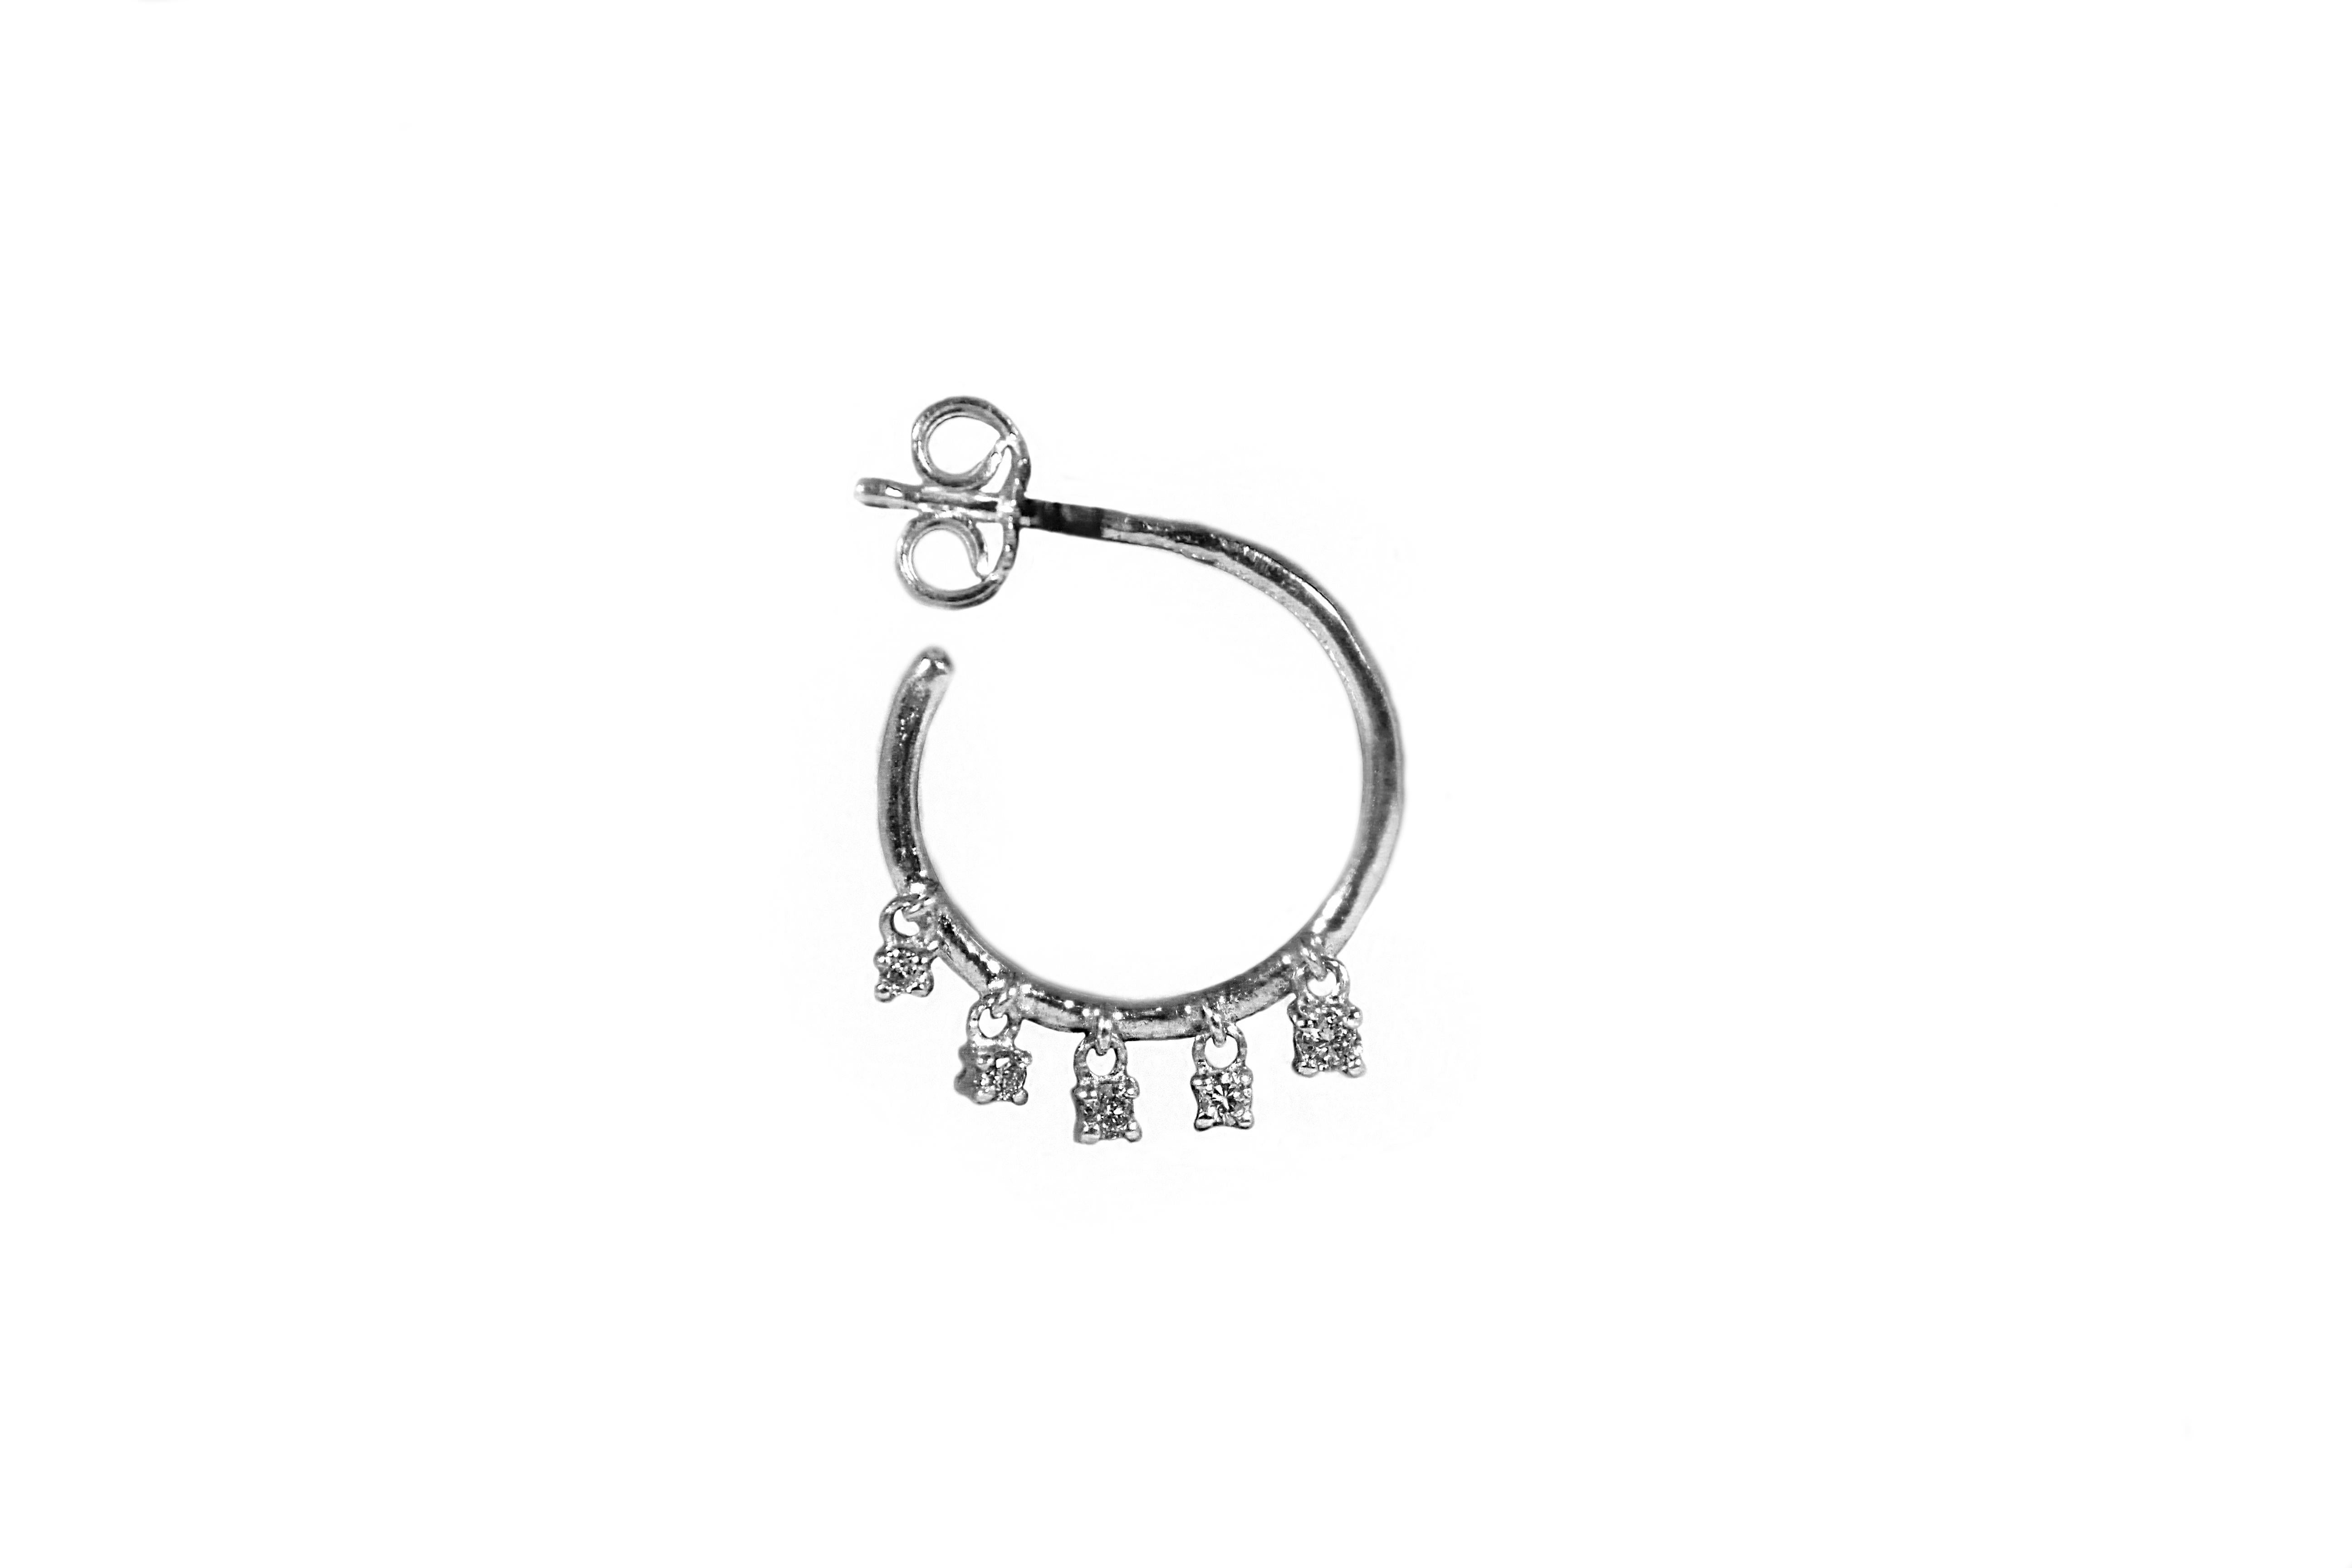 White gold circlet earrings with 5  hanging diamonds.

Composition : 
Gold 3,95 gr (18K)
10 diamonds 0,17 ct

